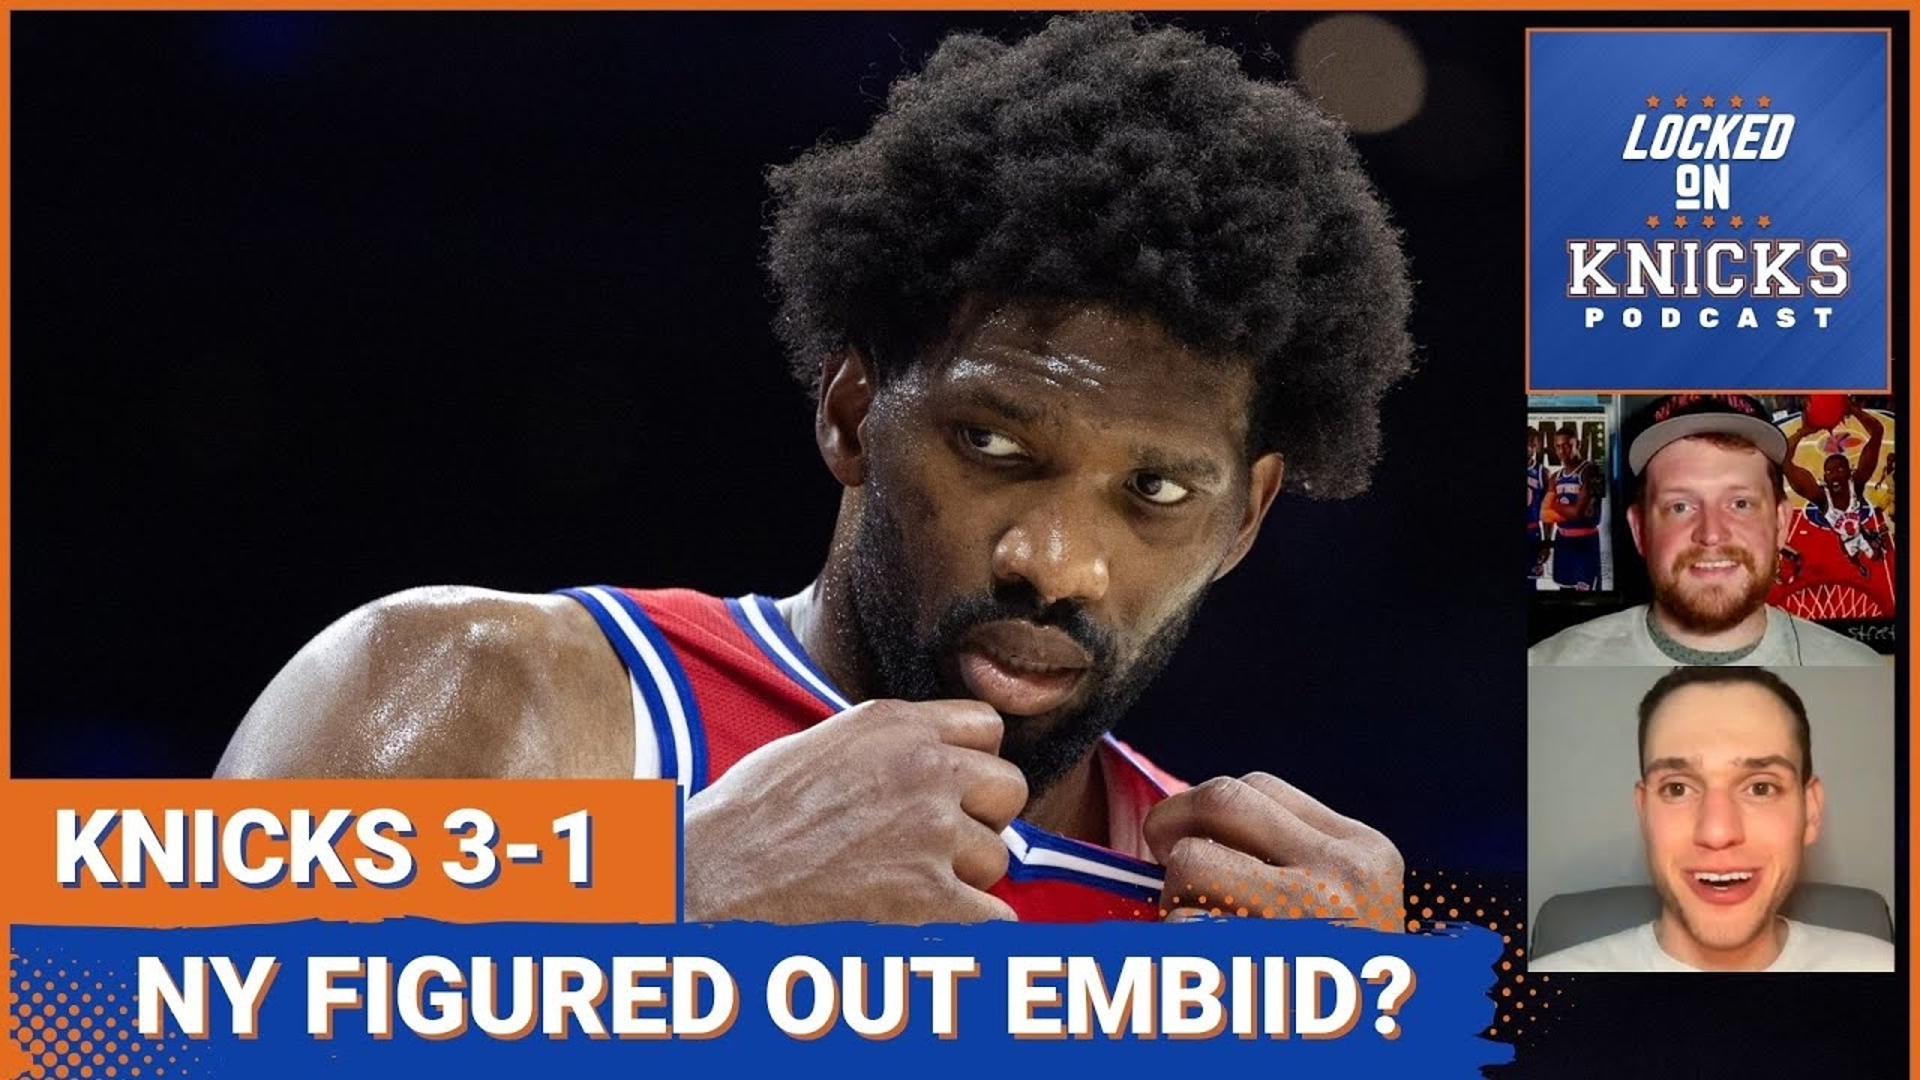 The guys discuss if the Knicks have Joel Embiid and the Sixers figured out after their win, give Deuce McBride praise for another great game and more.